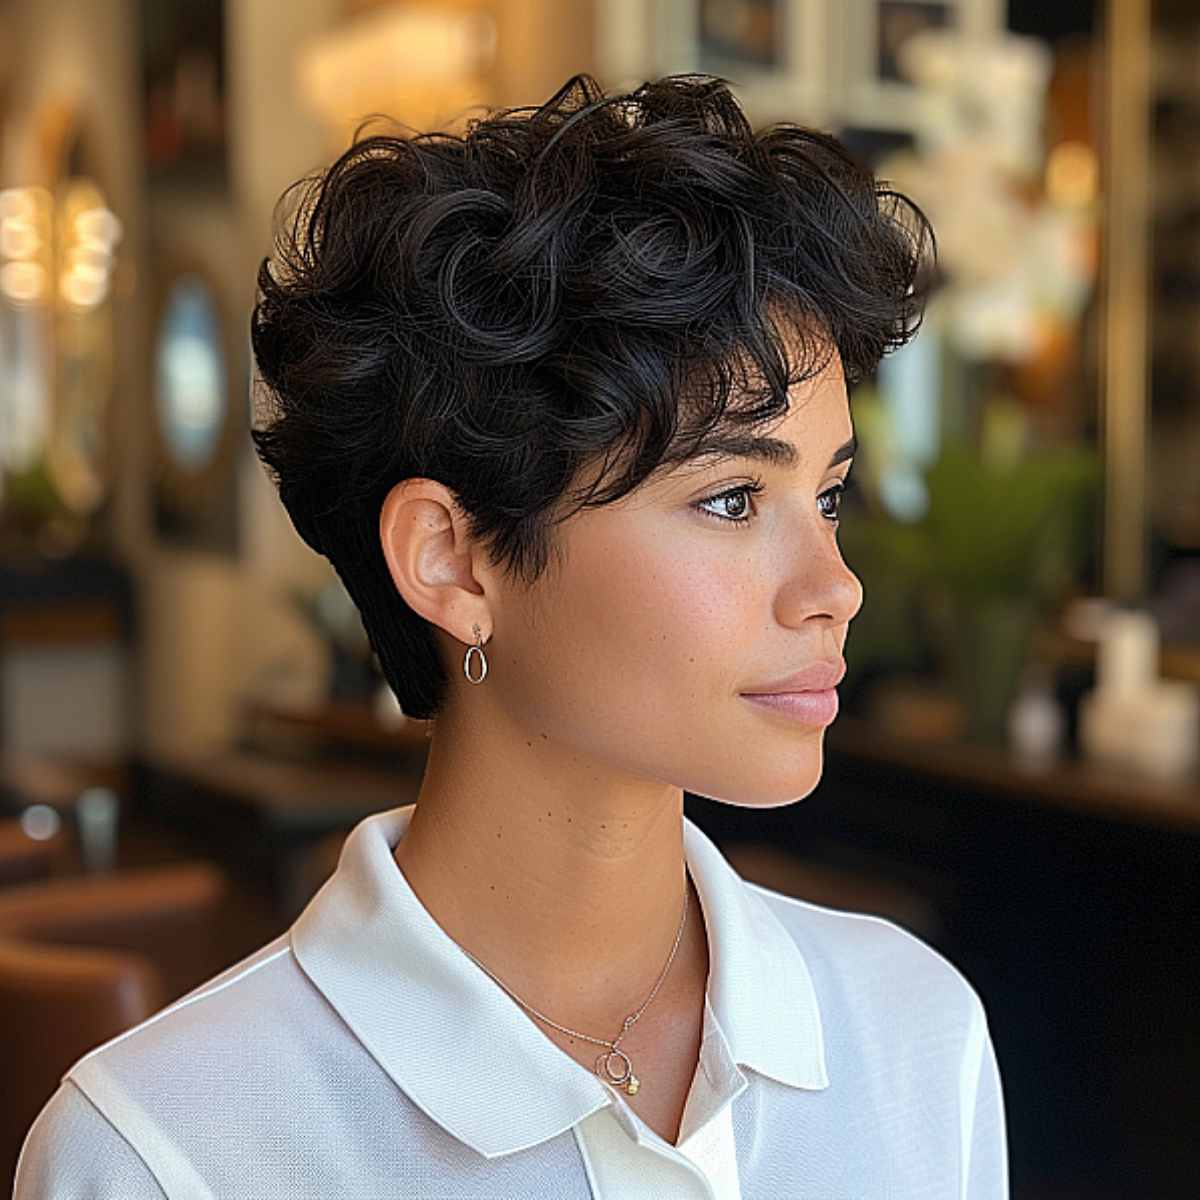 Wavy Pixie for Short Hair with Curls